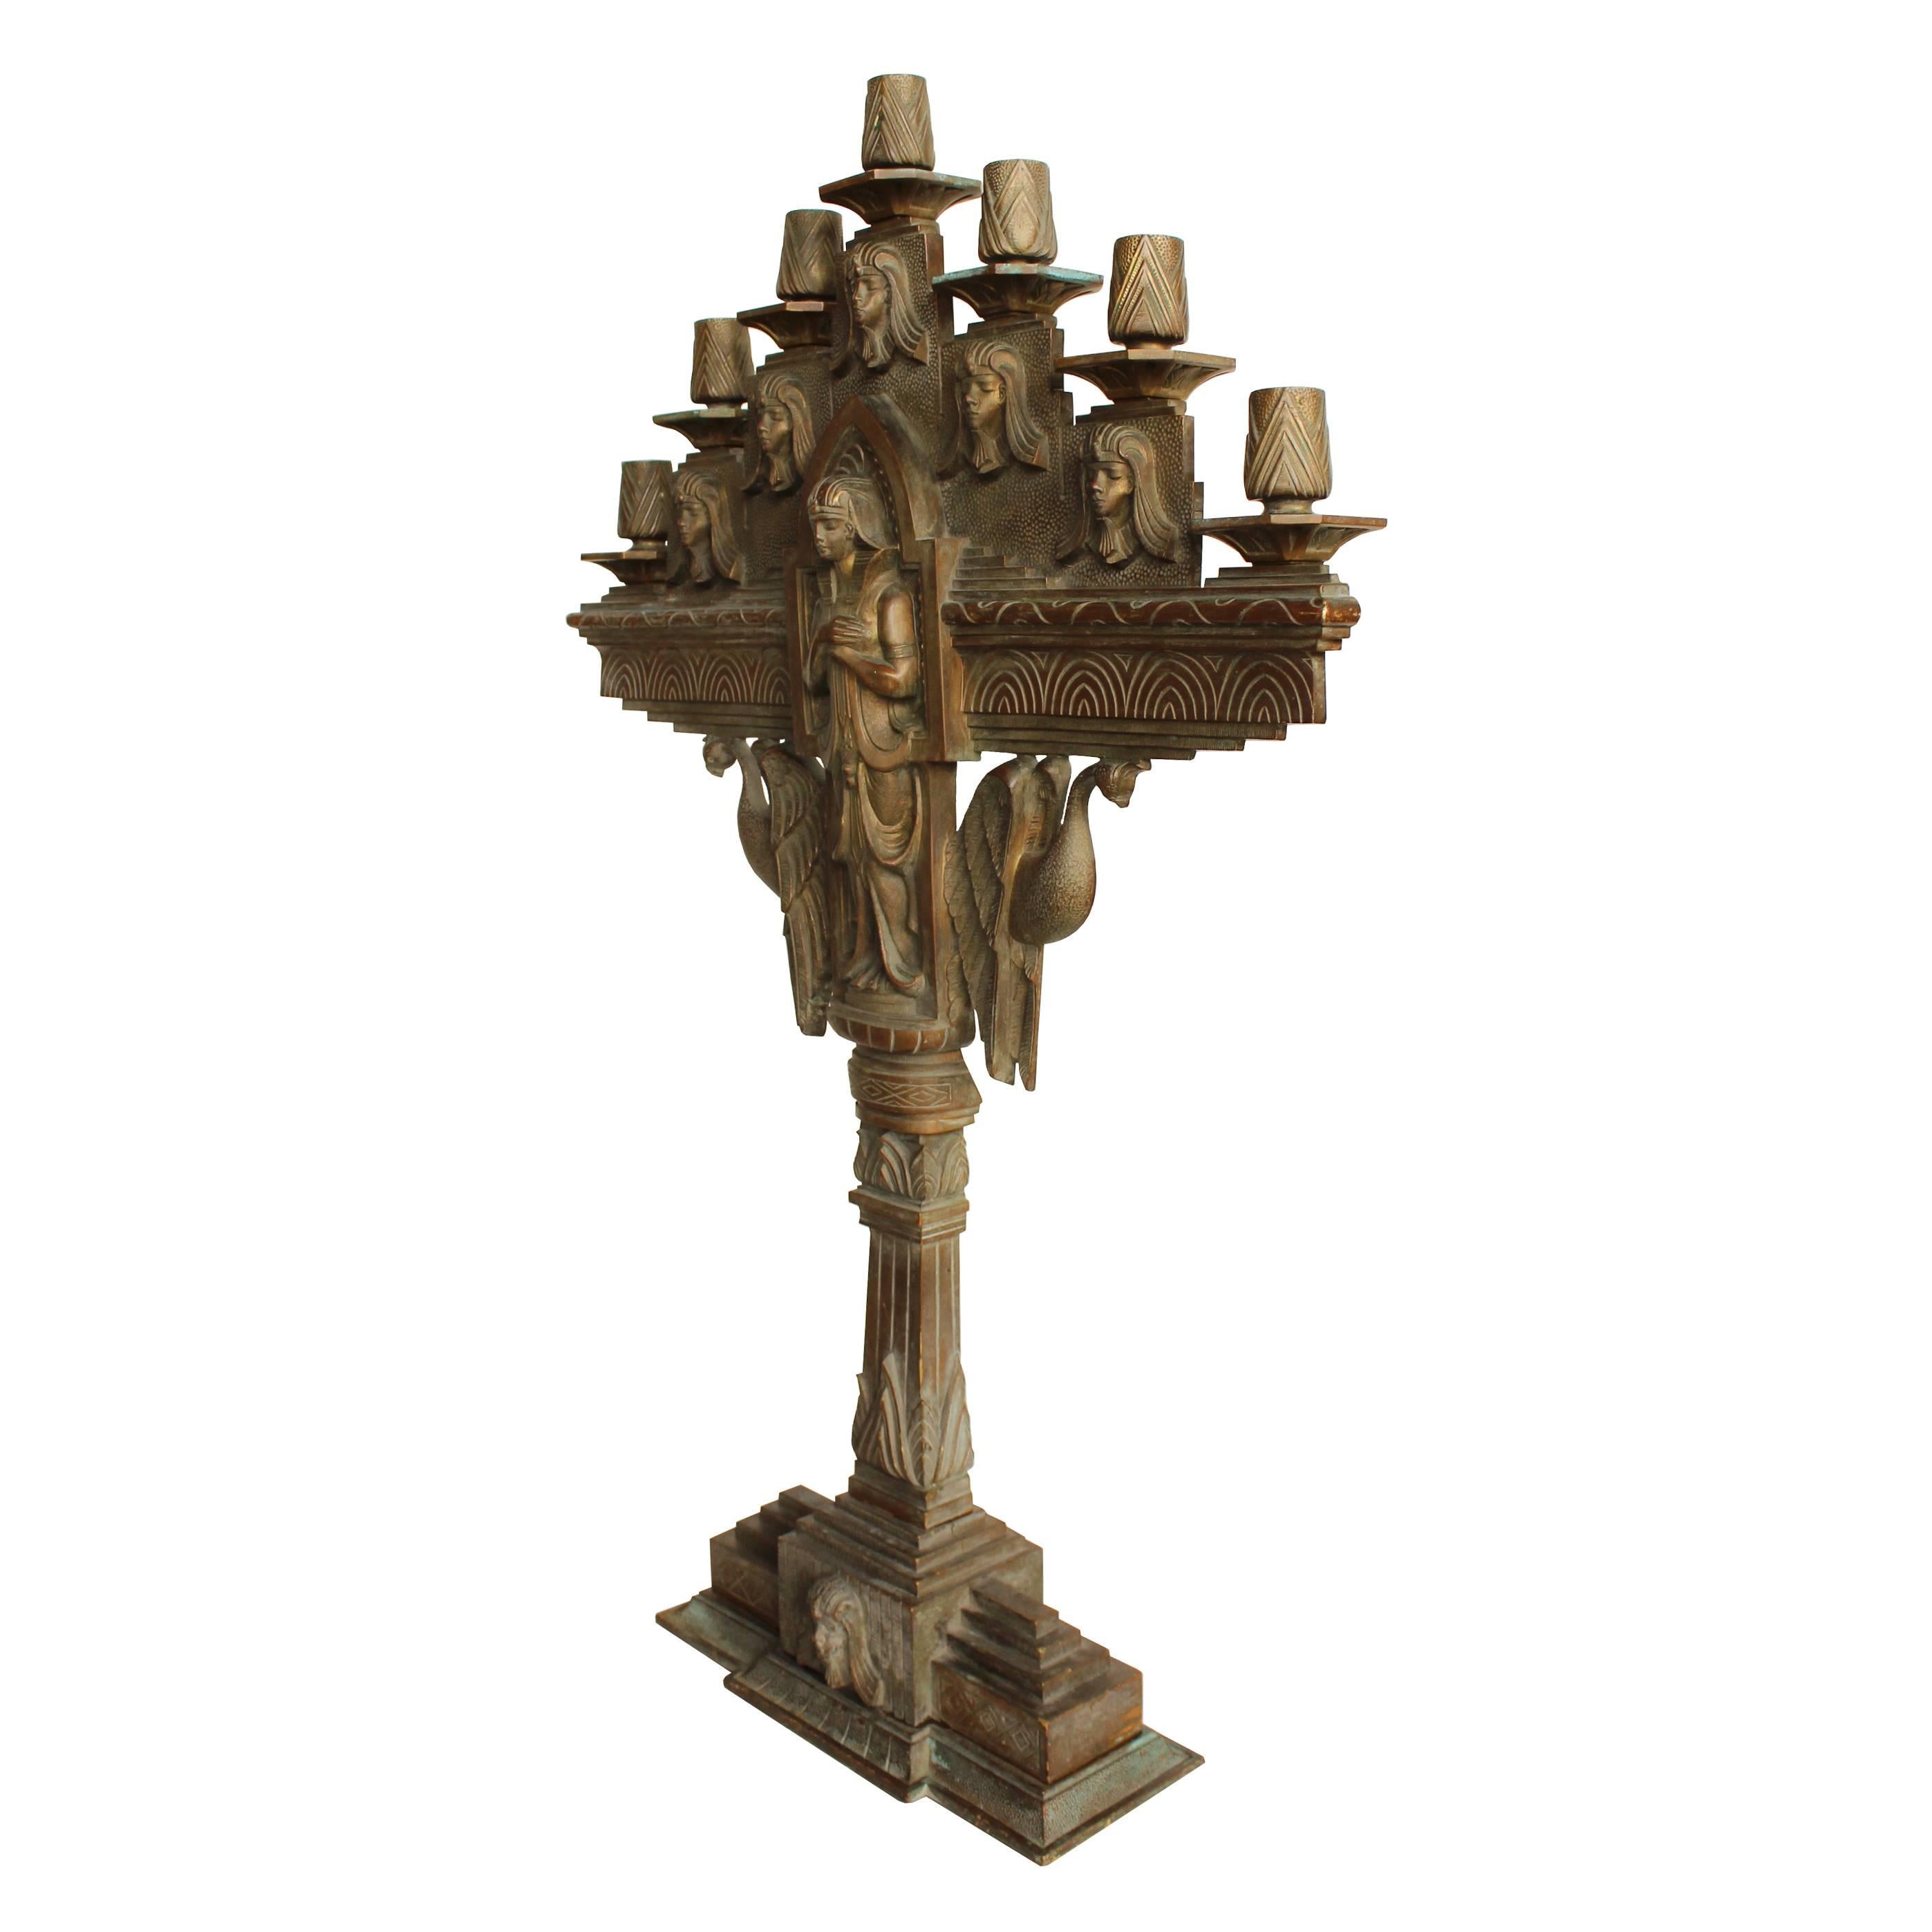 This early 20th century bronze candelabrum has all the drama and mystique of an excellent Egyptian Revival piece. Geometric designs in concentric patterns accentuate fantastic stylized Pharaoh figures.  May have been used in a fraternal lodge.